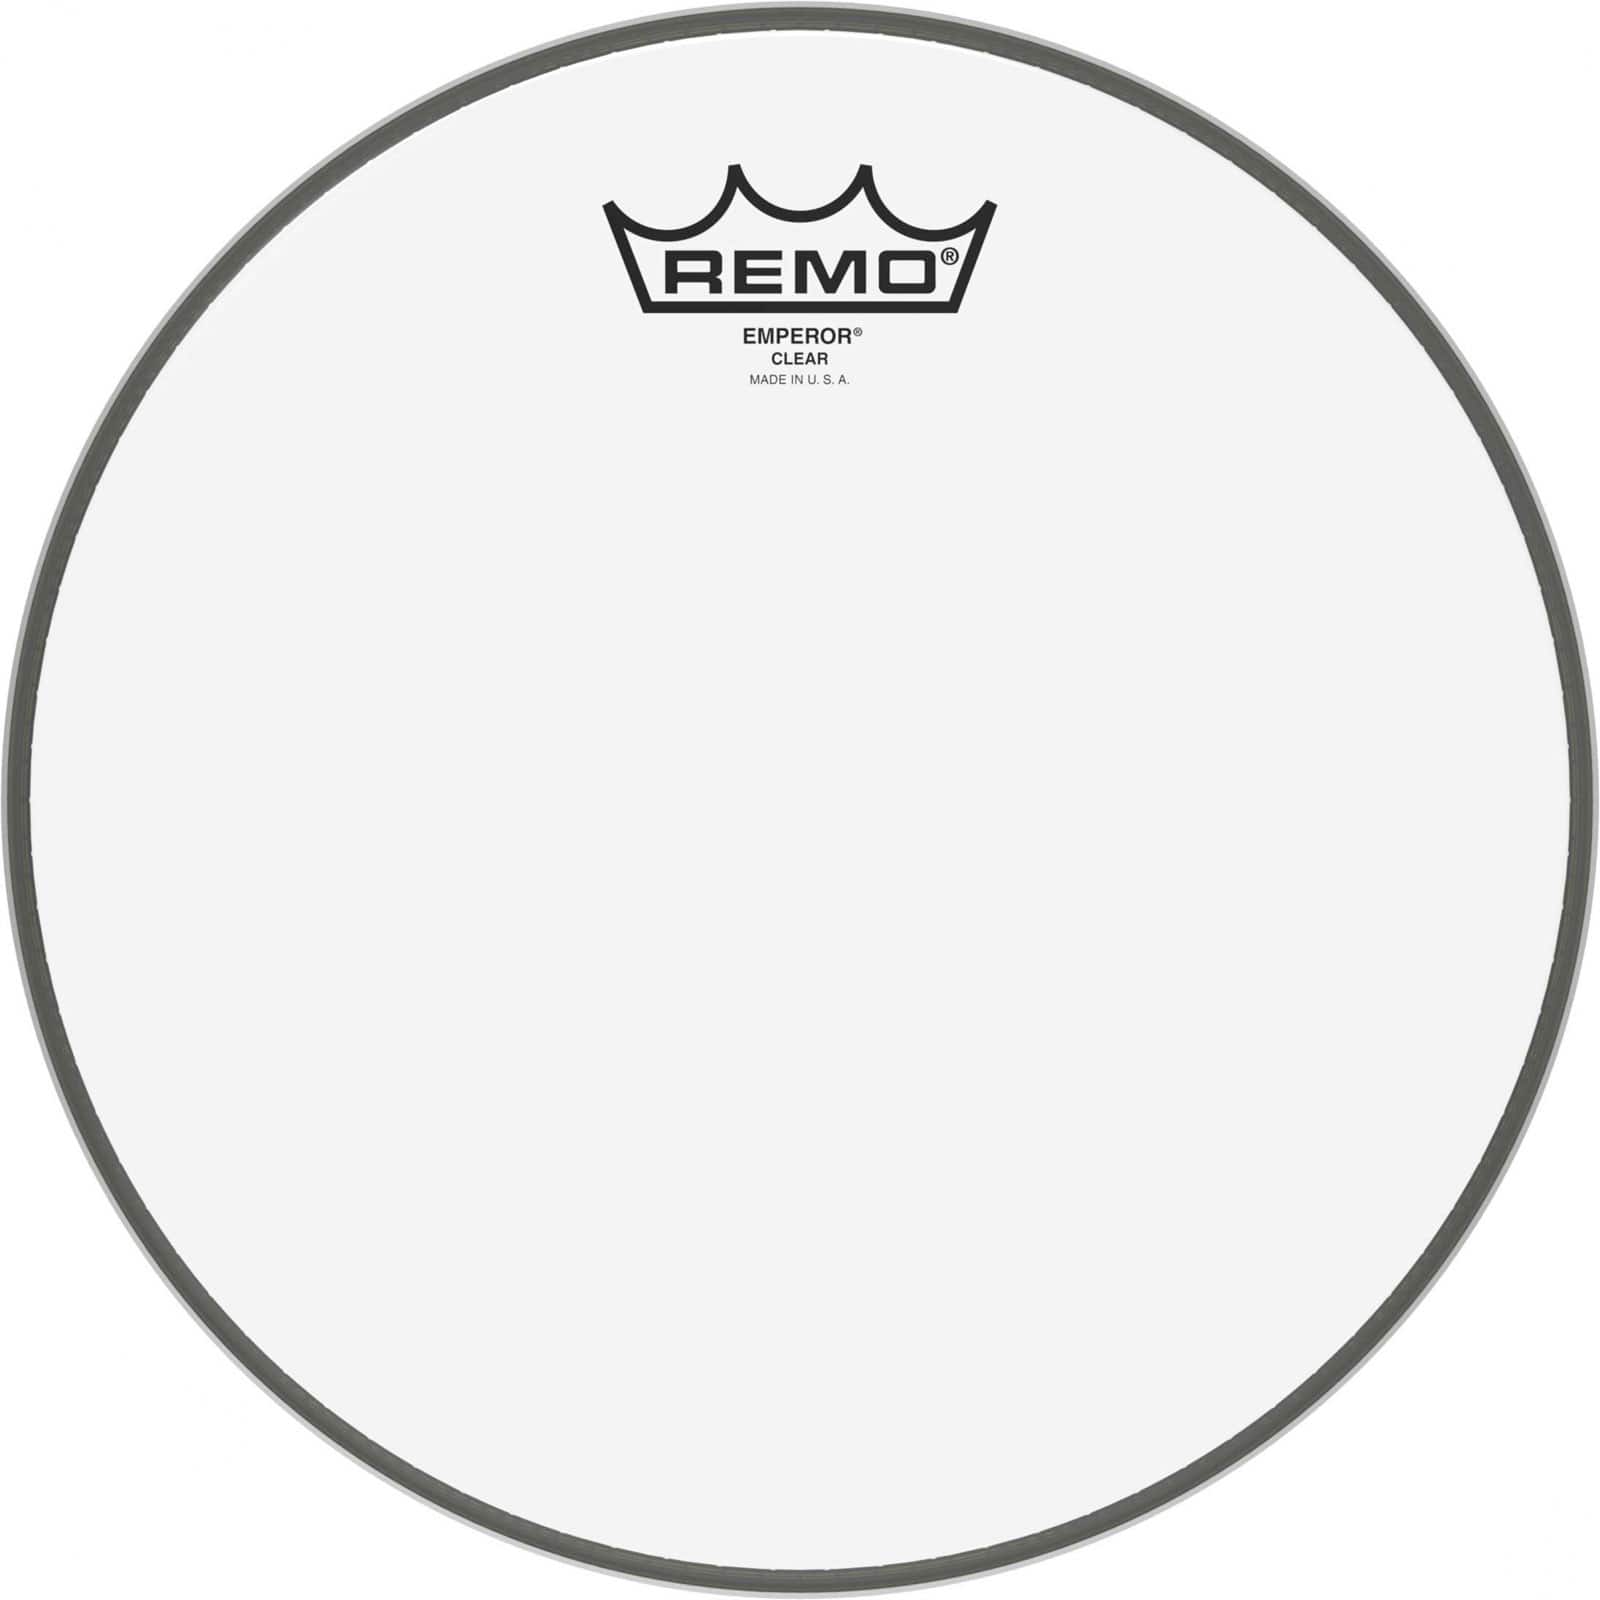 REMO EMPEROR 10 - CLEAR - BE-0310-00